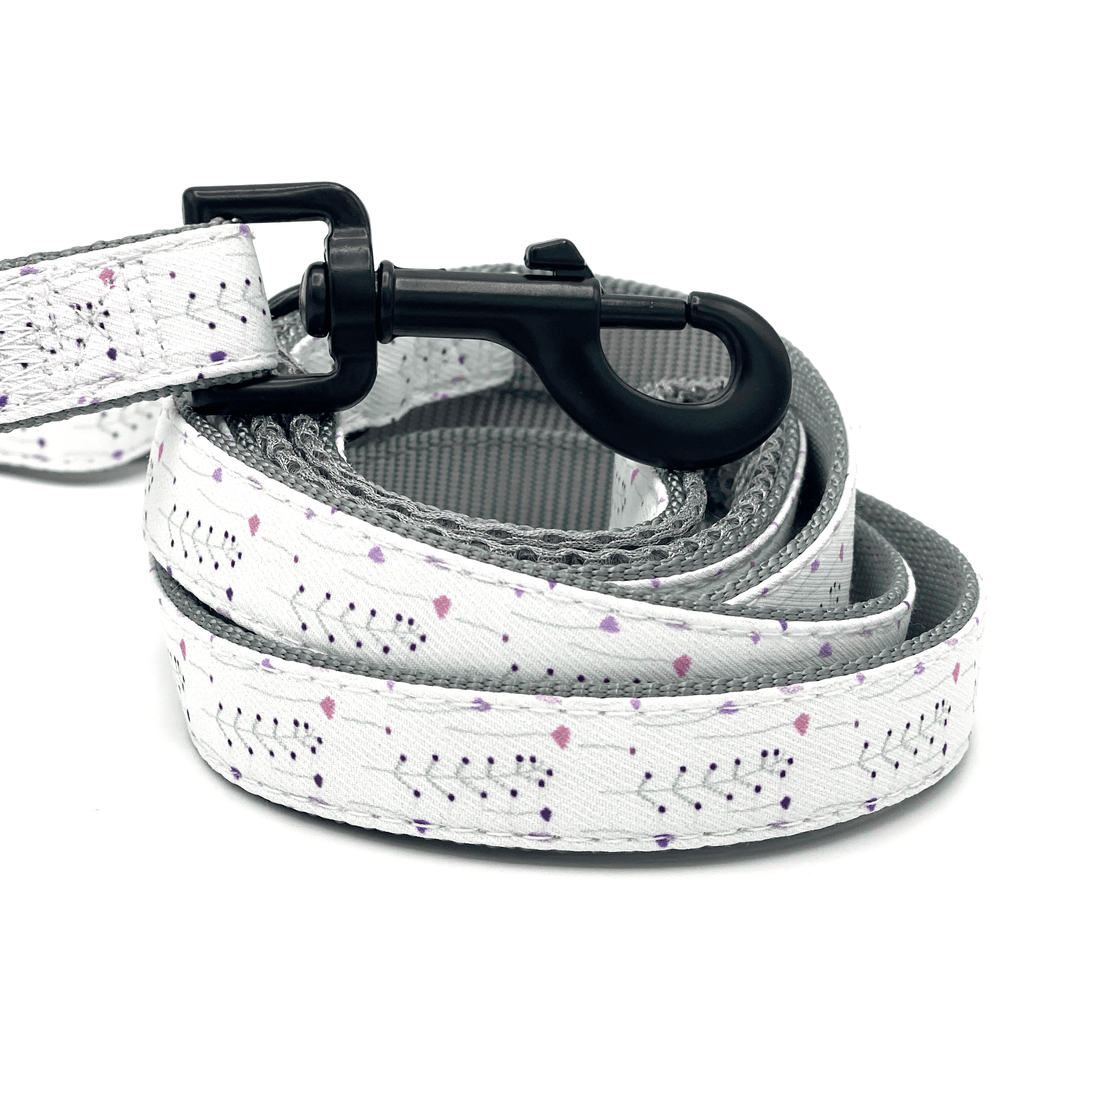 a wildflower patterned leash with single stem flowers, black clasp, and grey handles